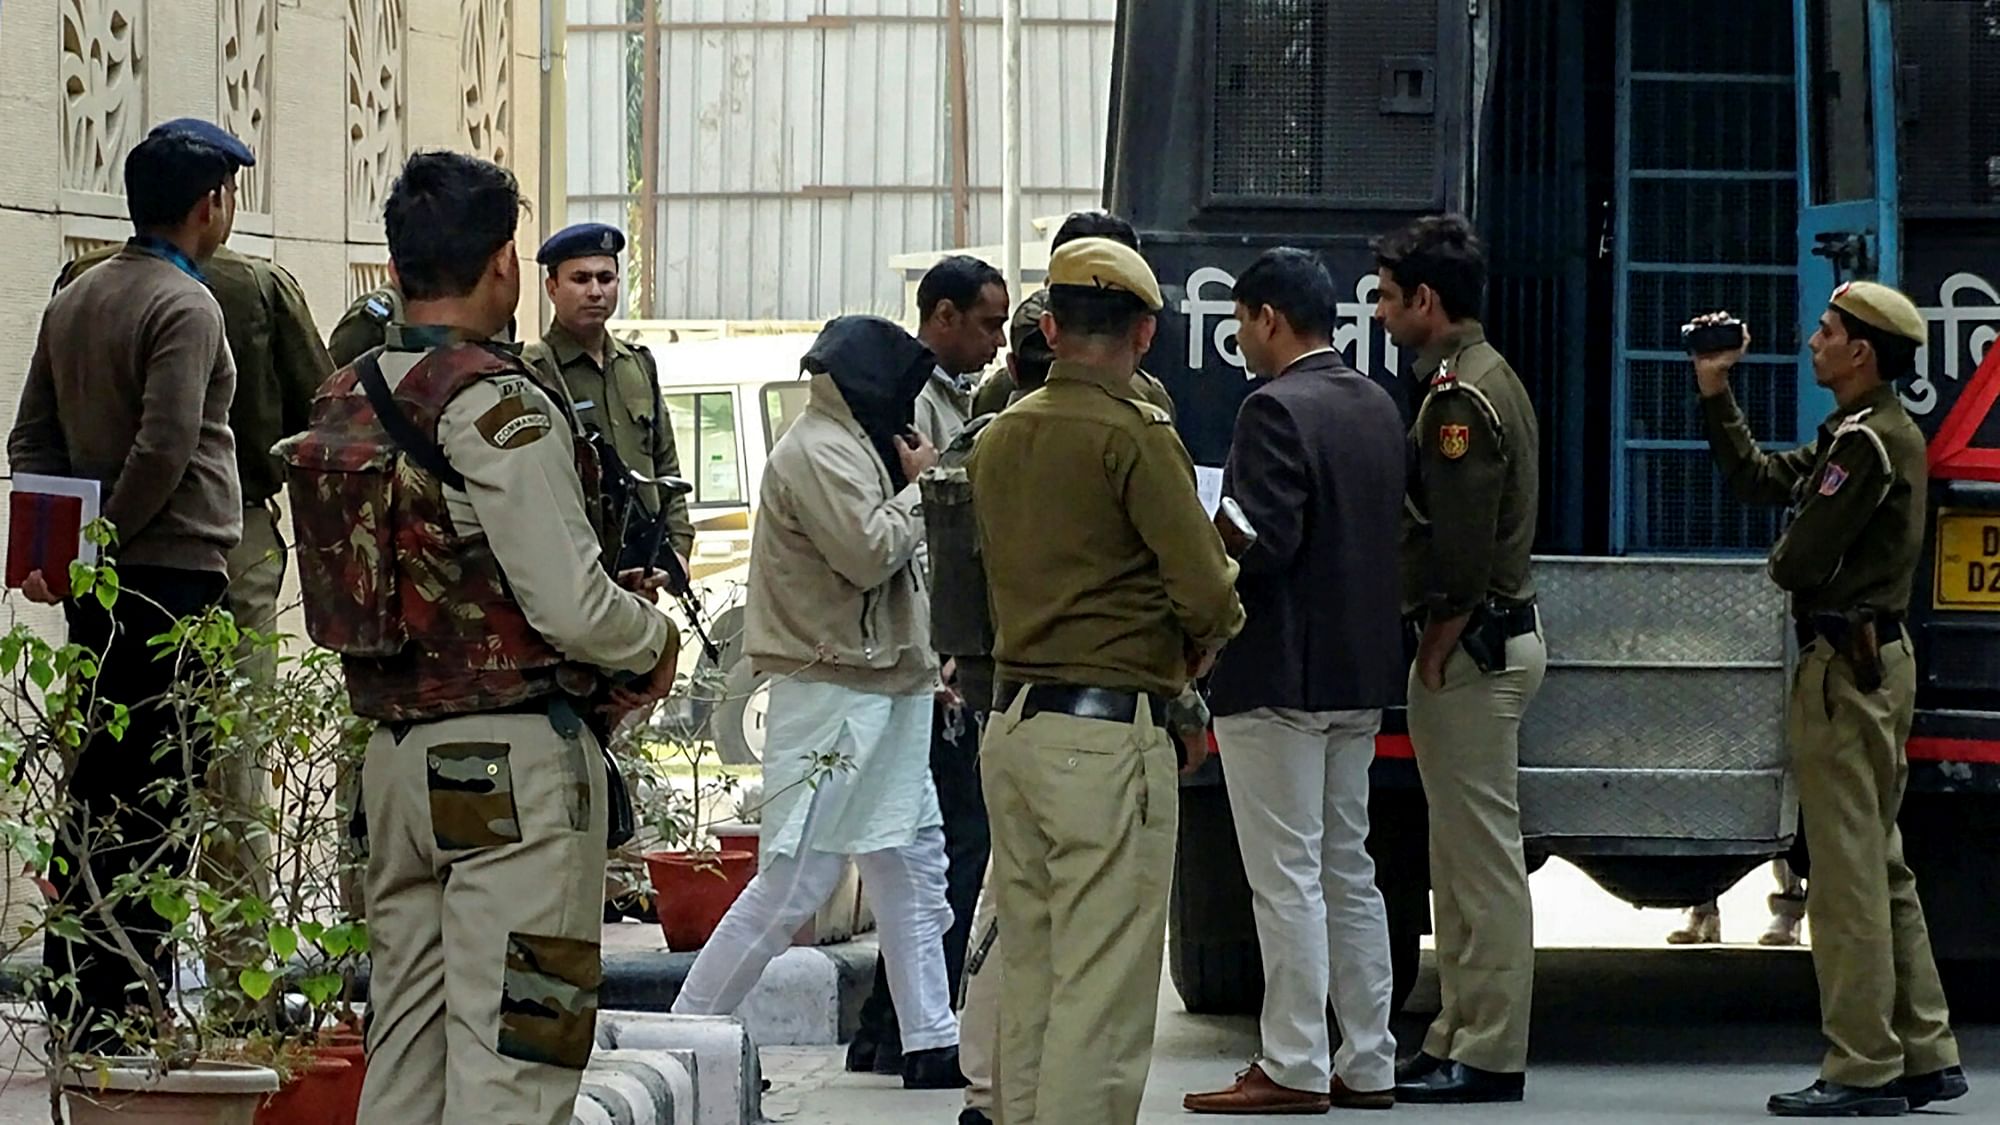 The 10 accused arrested in ISIS case being taken to court from the NIA headquarter in New Delhi